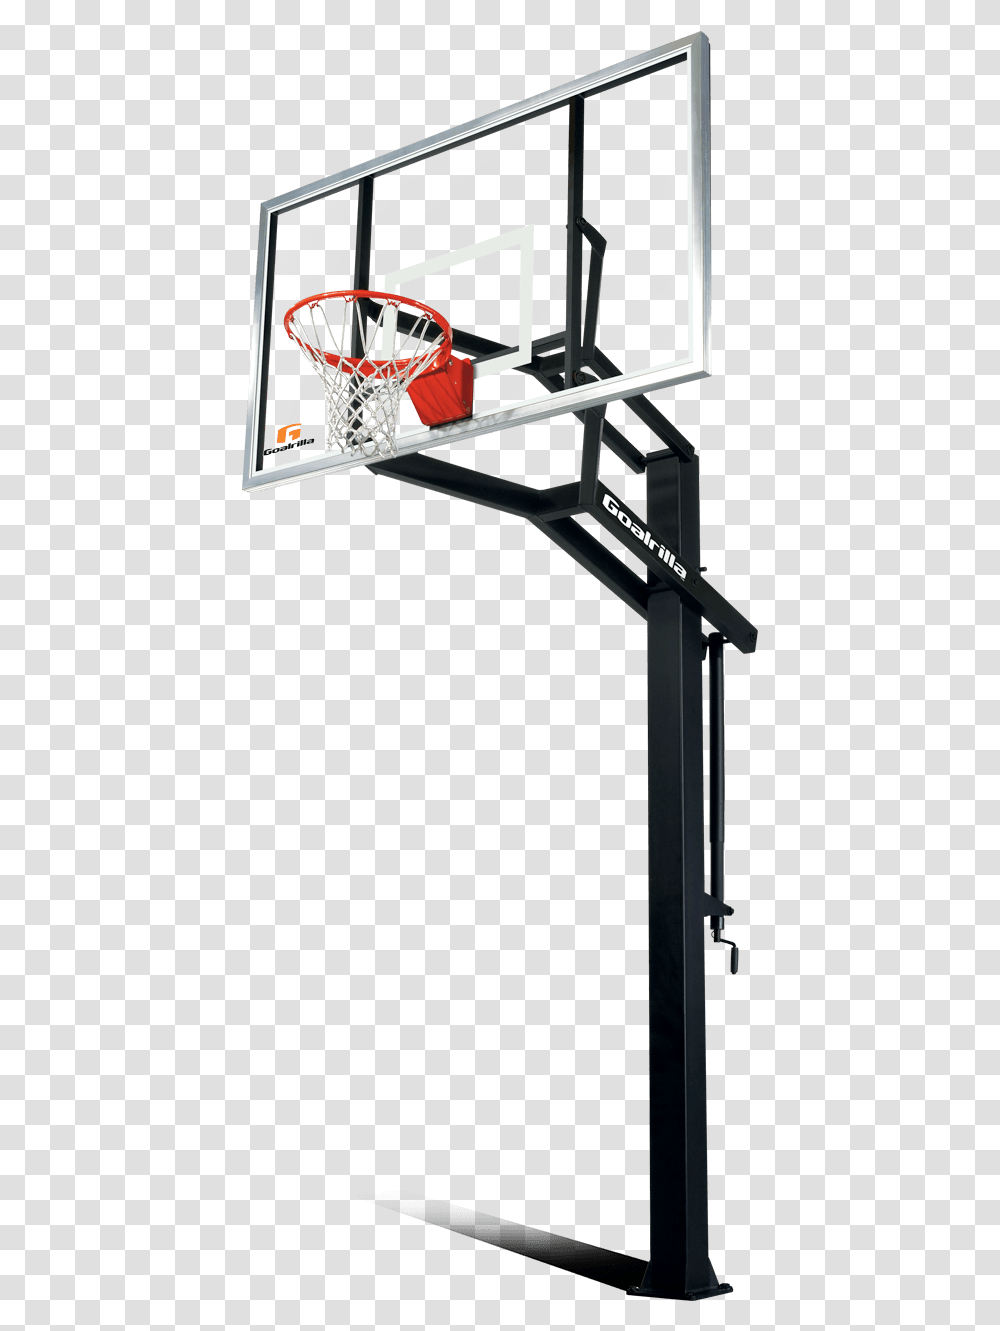 Basketball Hoop Stand Goalrilla 72 In Ground Basketball Hoop, Electronics, Screen, Monitor, Handrail Transparent Png